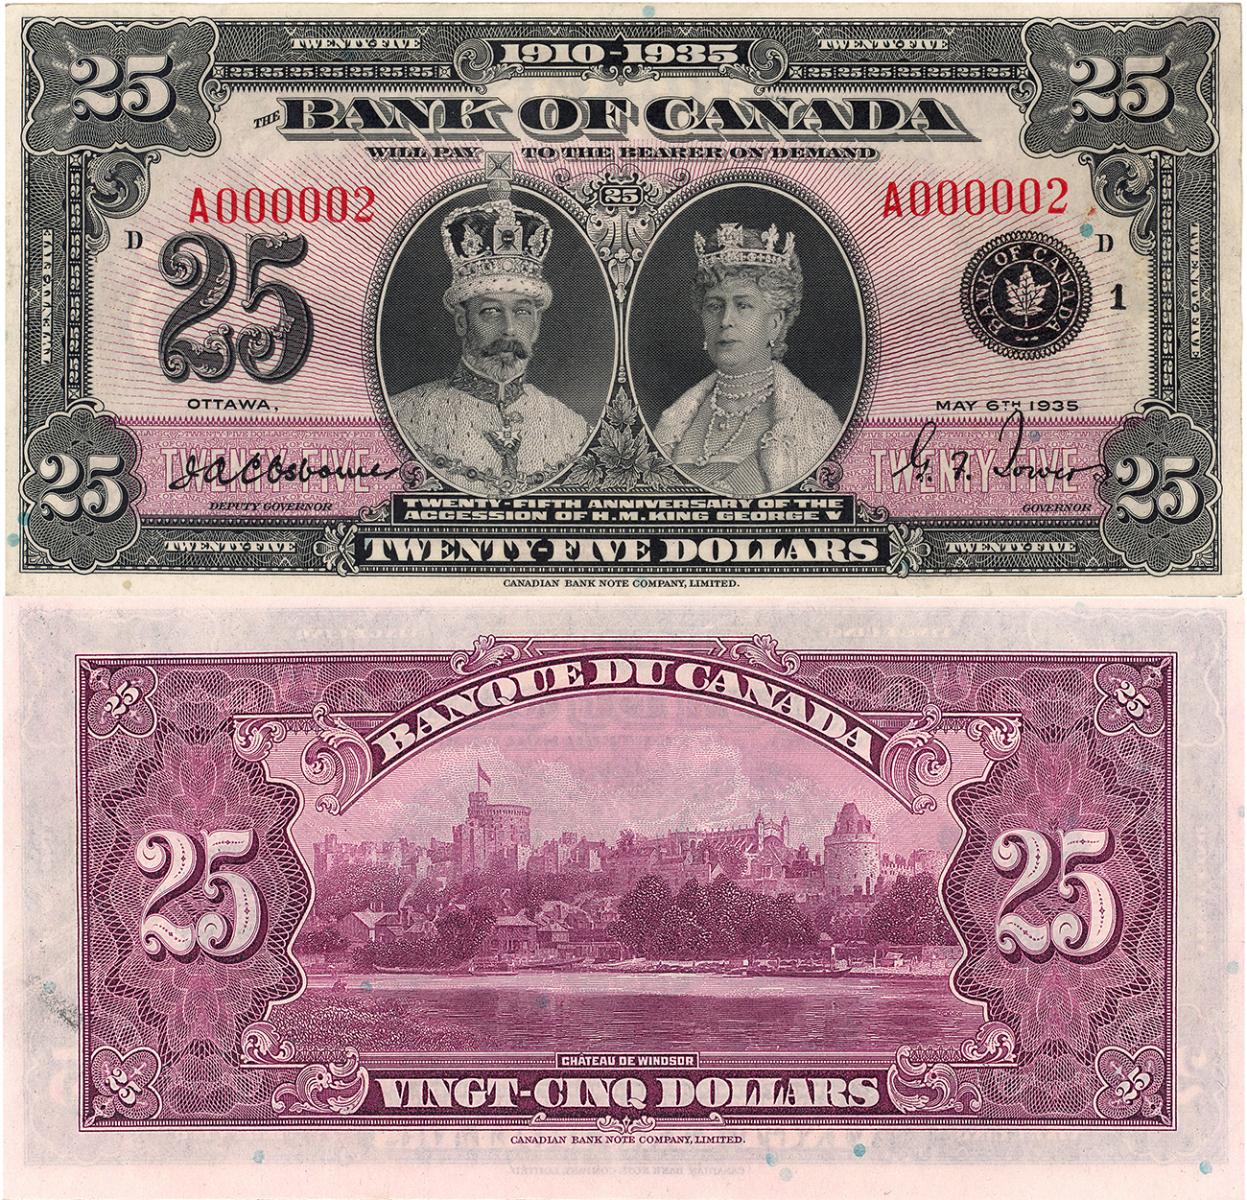 pale purple bank note with portraits of King George V and Queen Mary